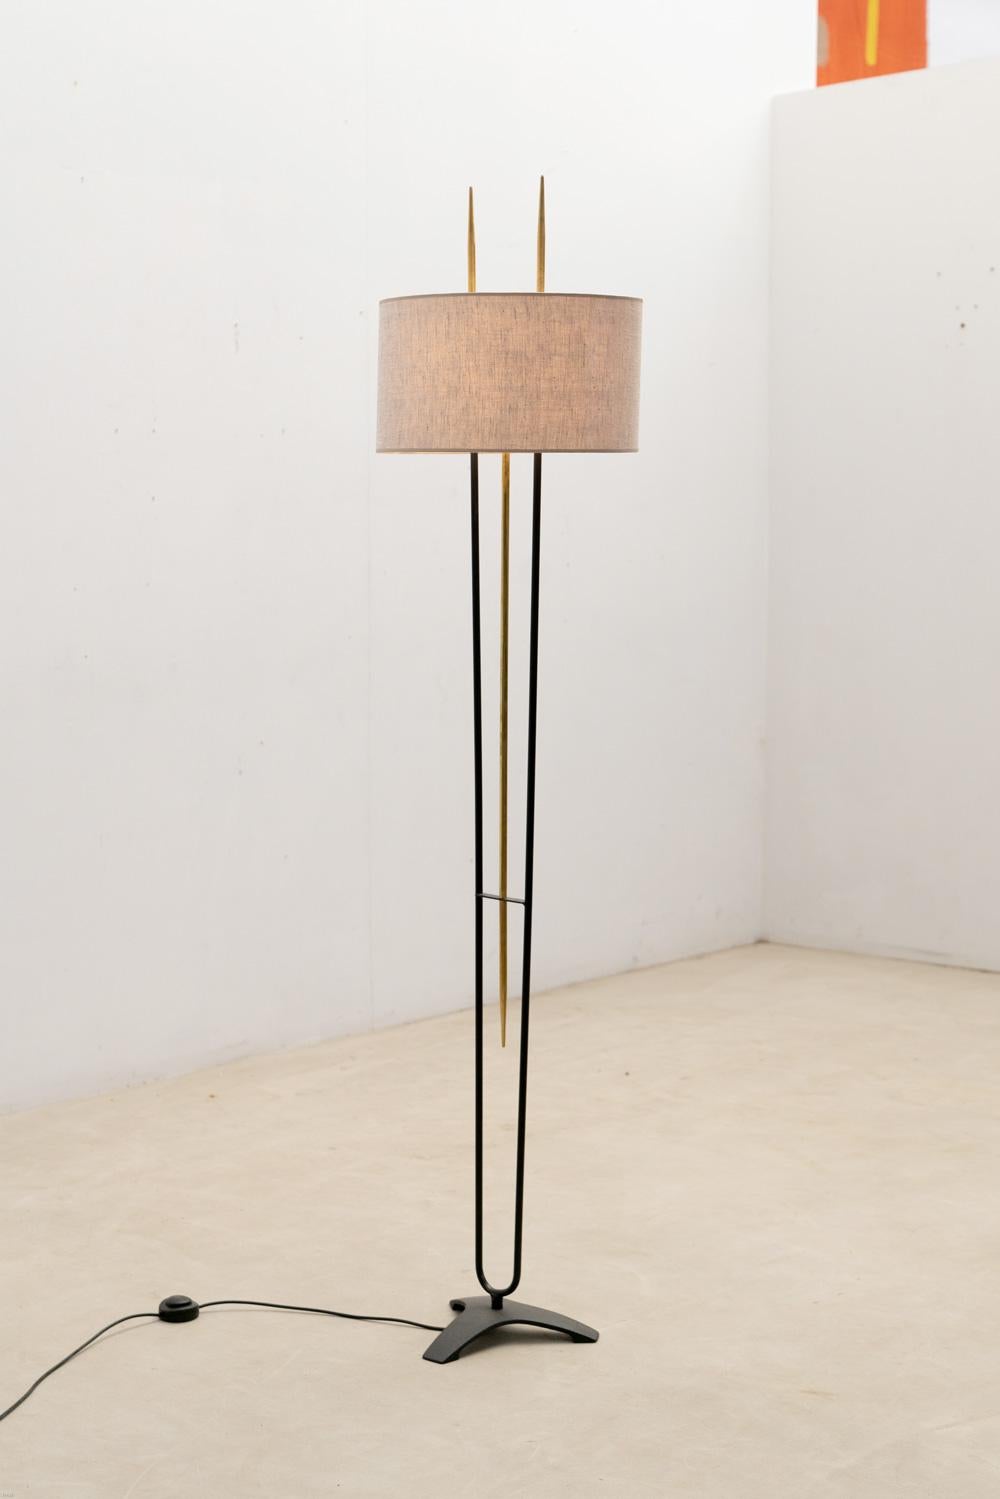 French design from 1970s, floor lamp in brass with an iron base. 
New shade.

Do not hesitate to contact us for any additional information. We would be more than delighted to assist you in any way we can.